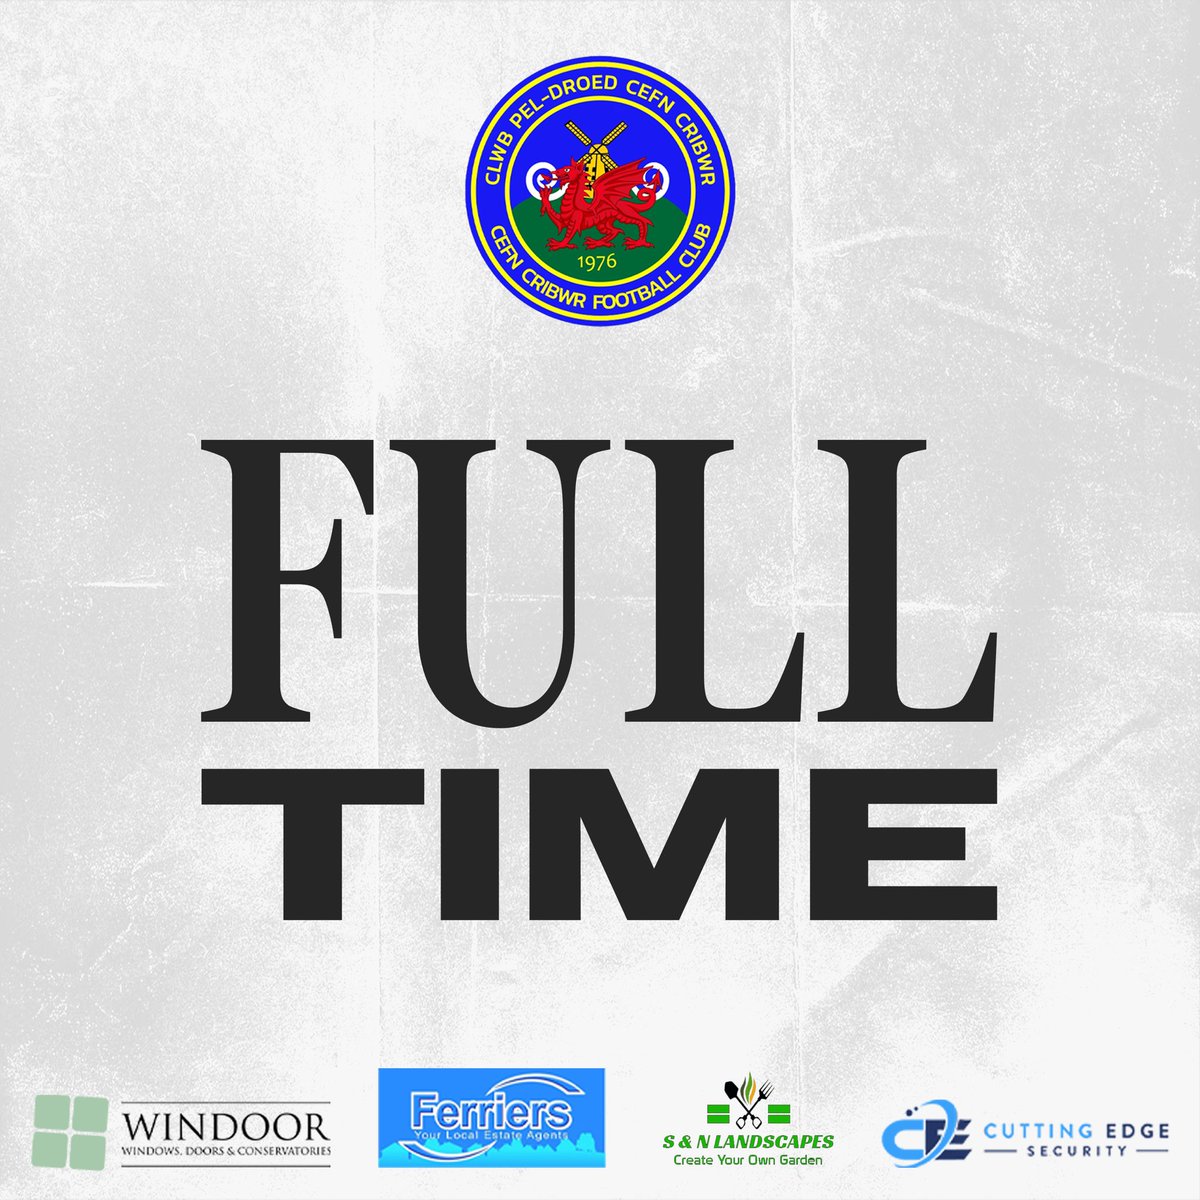 FIRST TEAM RESULT Cefn 4️⃣-0️⃣ @Morriston_Town Ending an unbelievable season with a superb win at Victoria Road! All eyes now on the SDM Glass Stadium! 🏟️👀🏆 @ArdalSouthern | #Riders